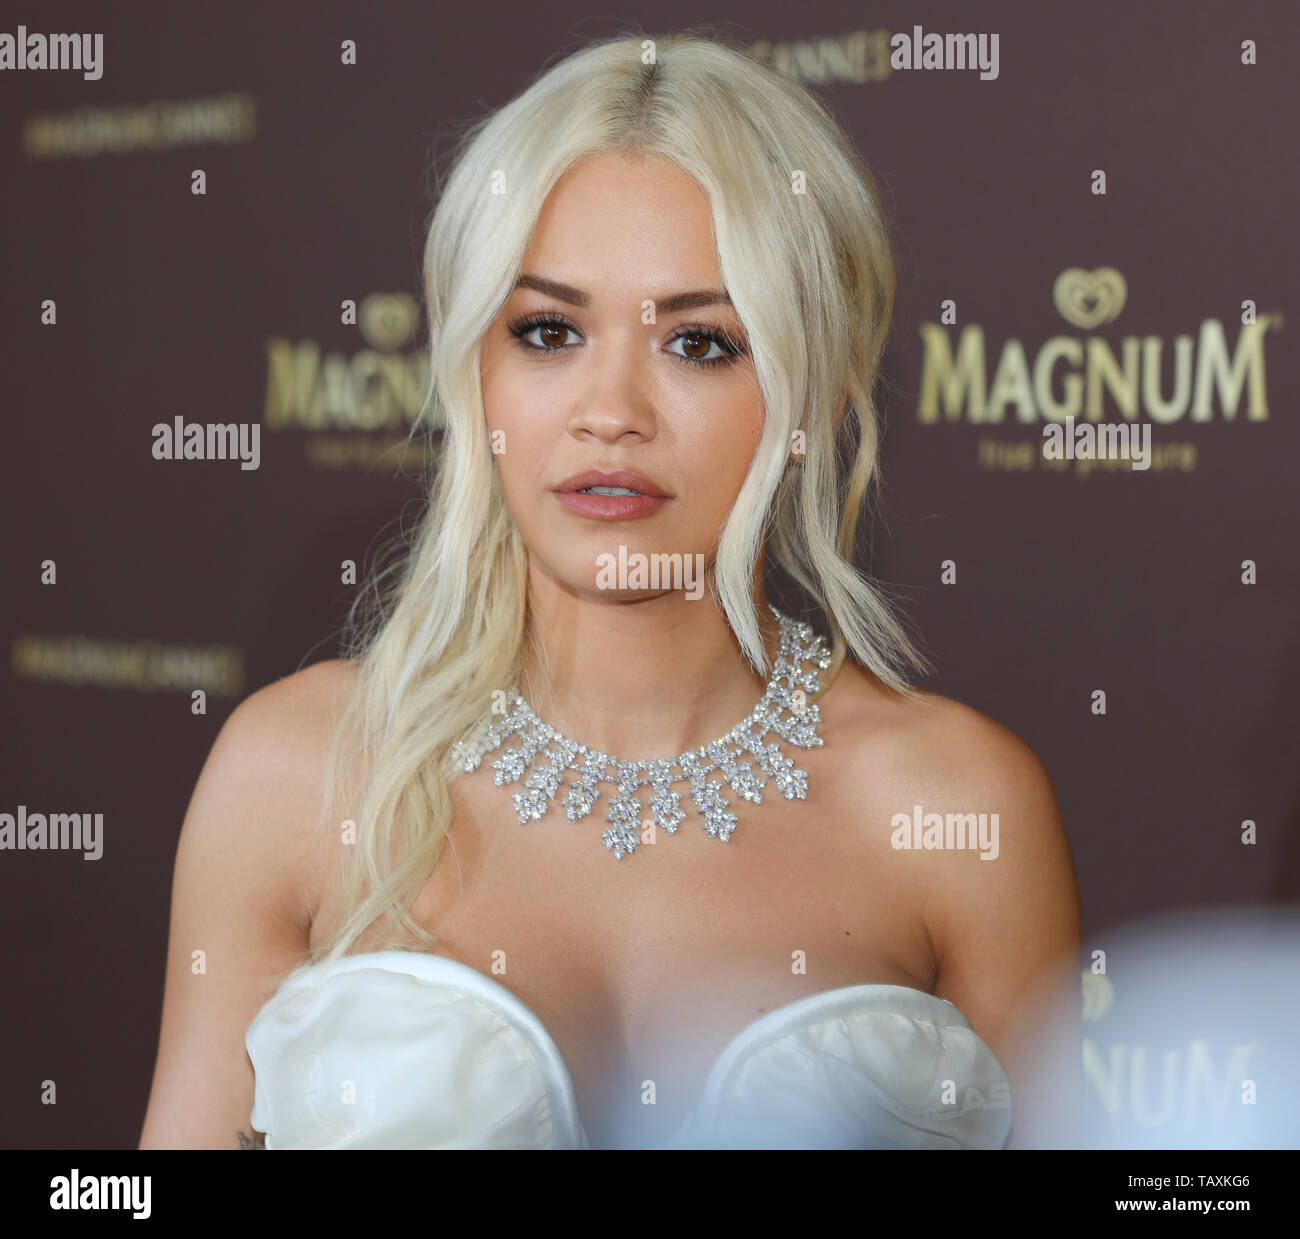 CANNES, FRANCE - MAY 26: Rita Ora attends the Magnum x Cannes Party during the 72nd Cannes Film Festival (Credit: Mickael Chavet/Zuma/Alamy Live News) Stock Photo